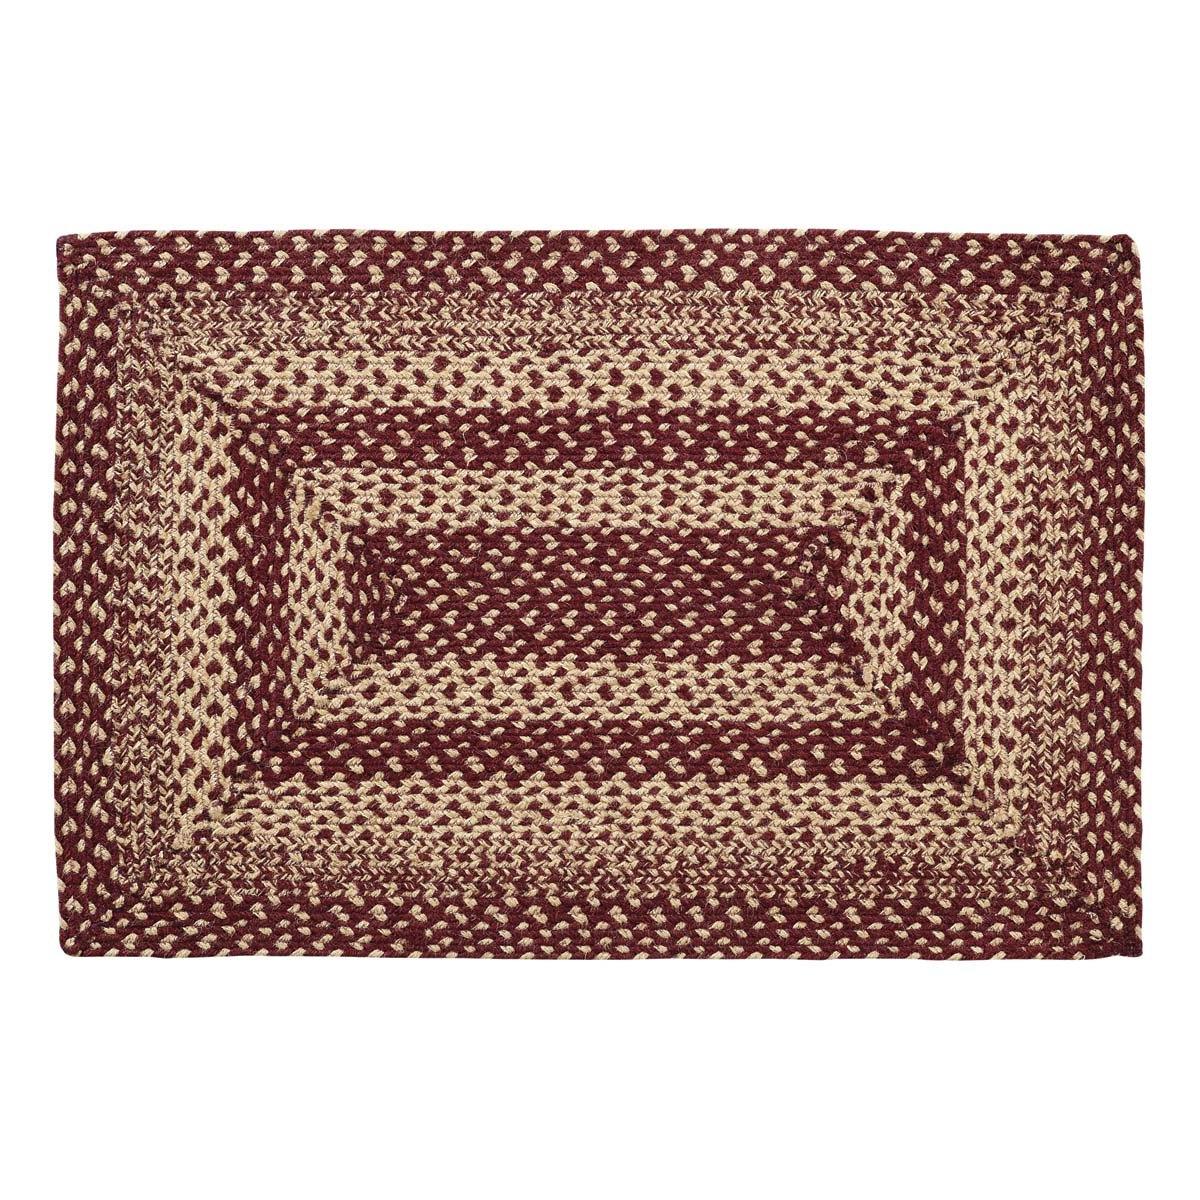 Burgundy Tan Jute Braided Rug Rect 24"x36" with Rug Pad VHC Brands - The Fox Decor